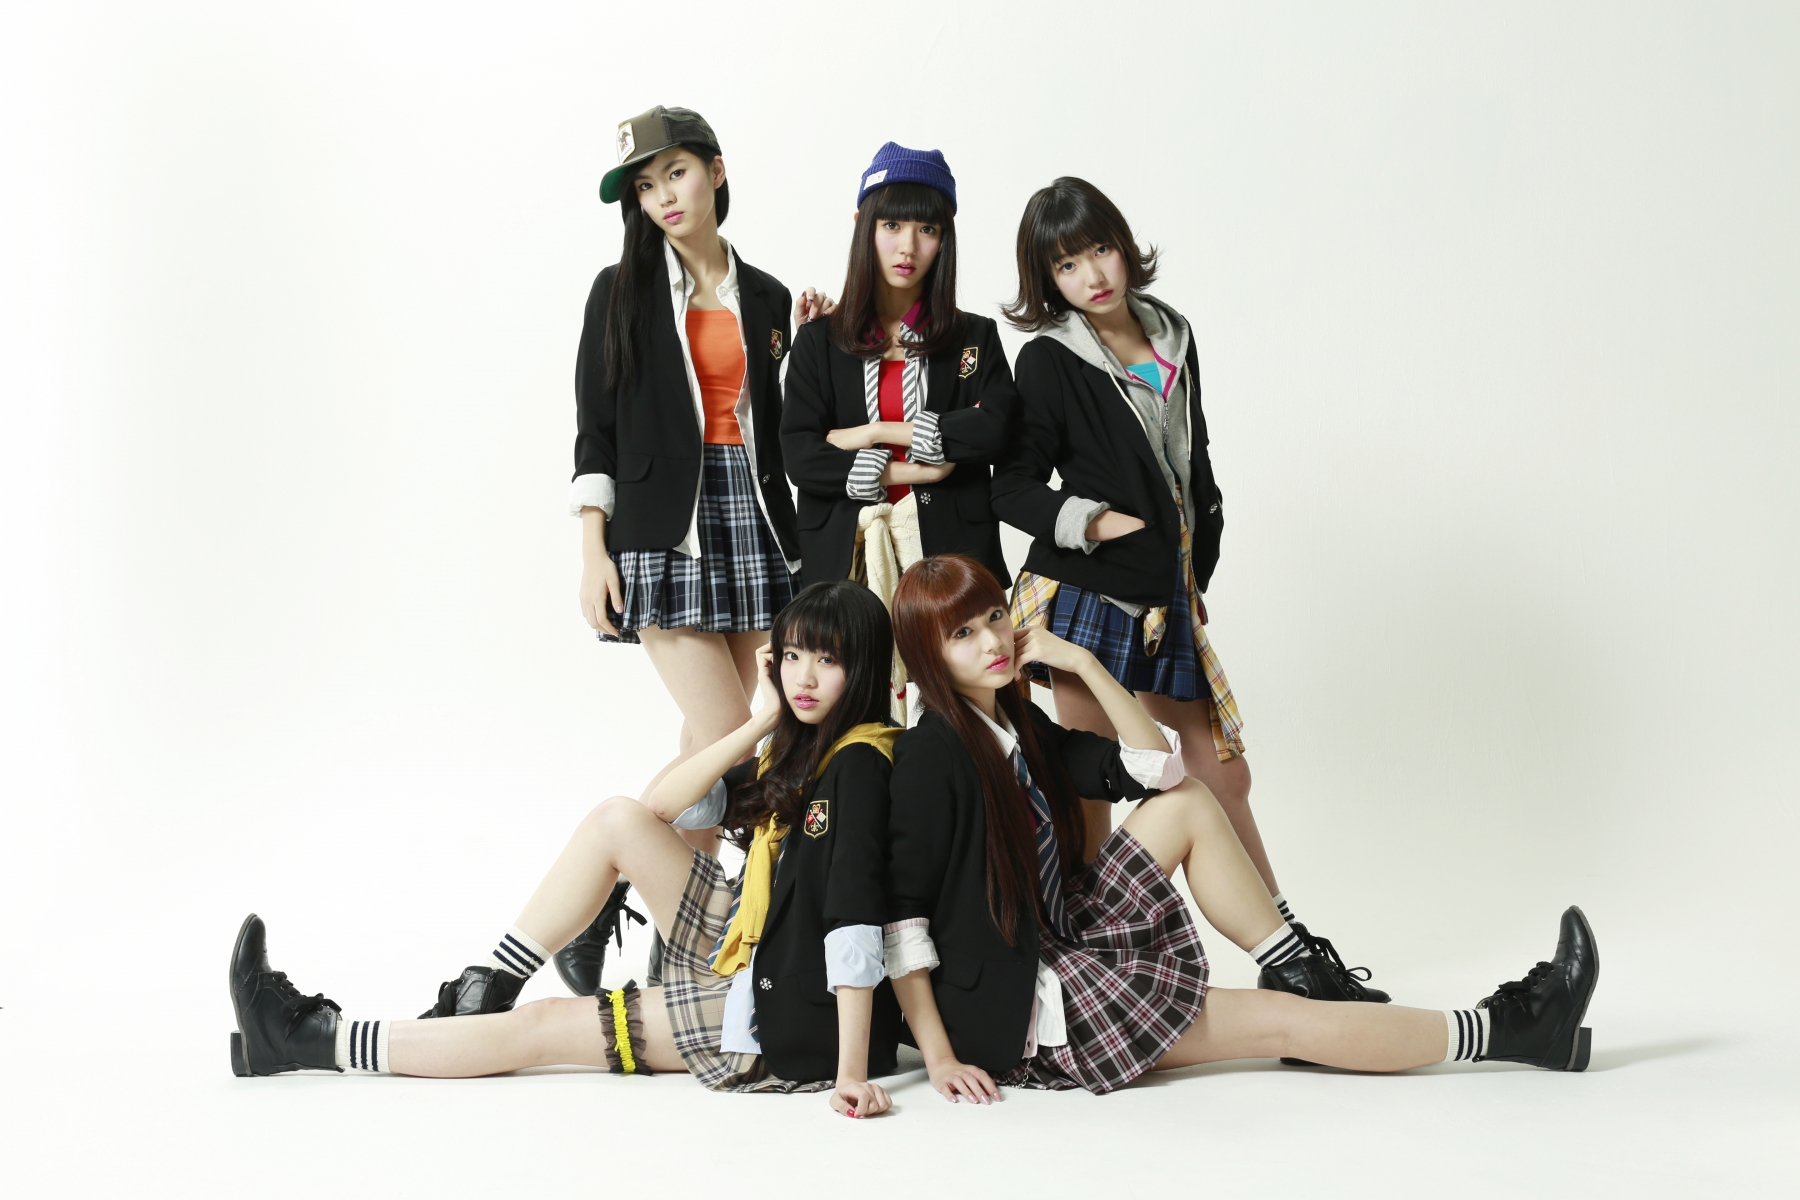 Yumemiru Adolescence and 2 More Idols Appearing  Anime Idol Asia 2014 in Thailand!